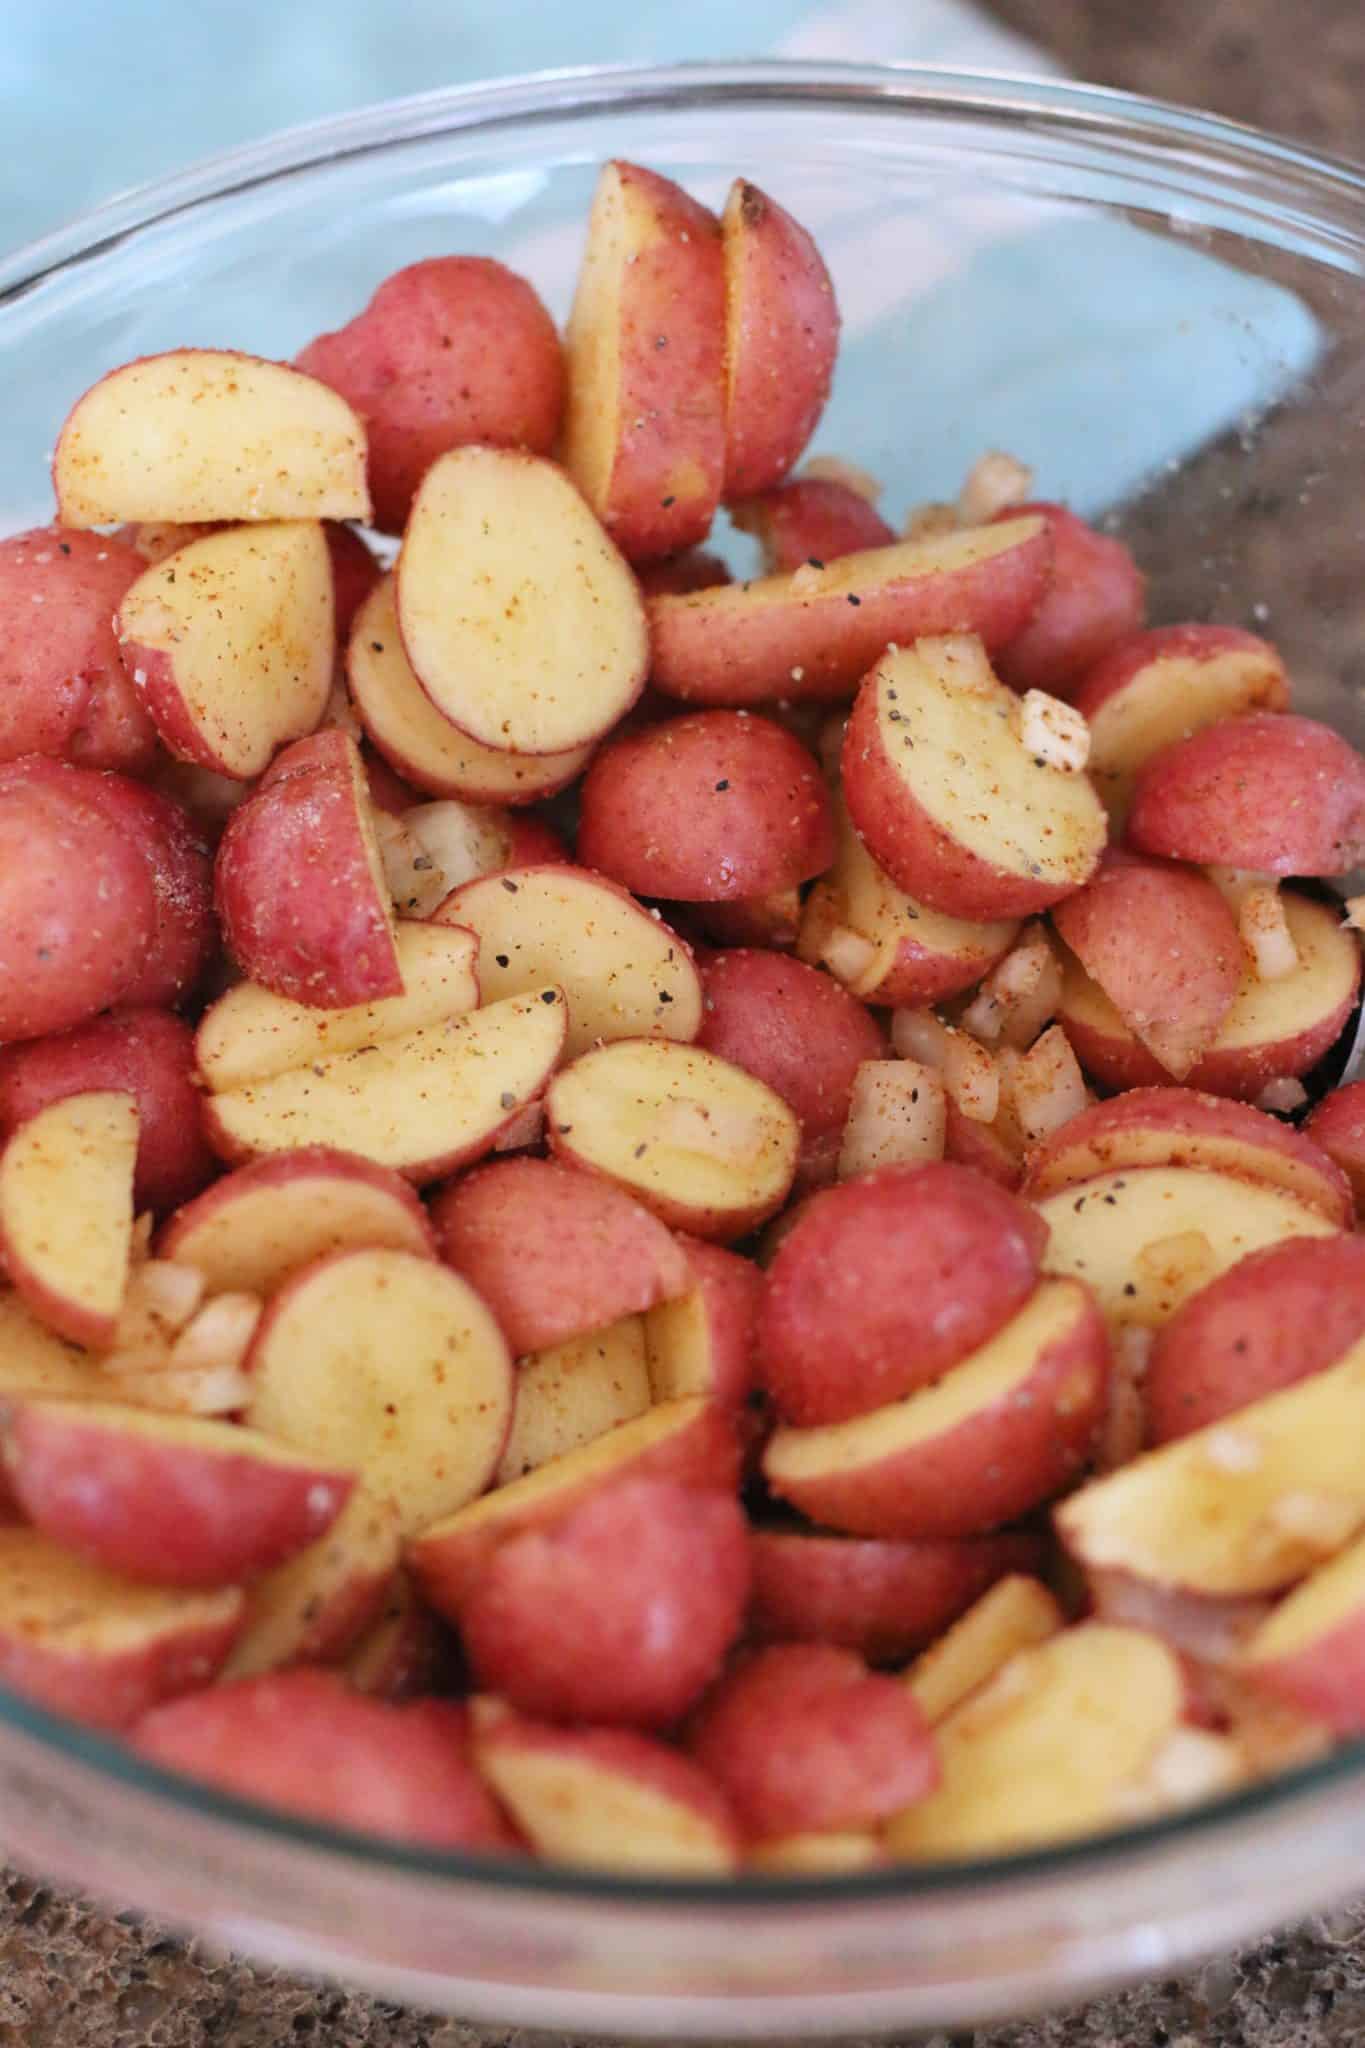 sliced red potatoes with seasoning stirred together in a bowl.